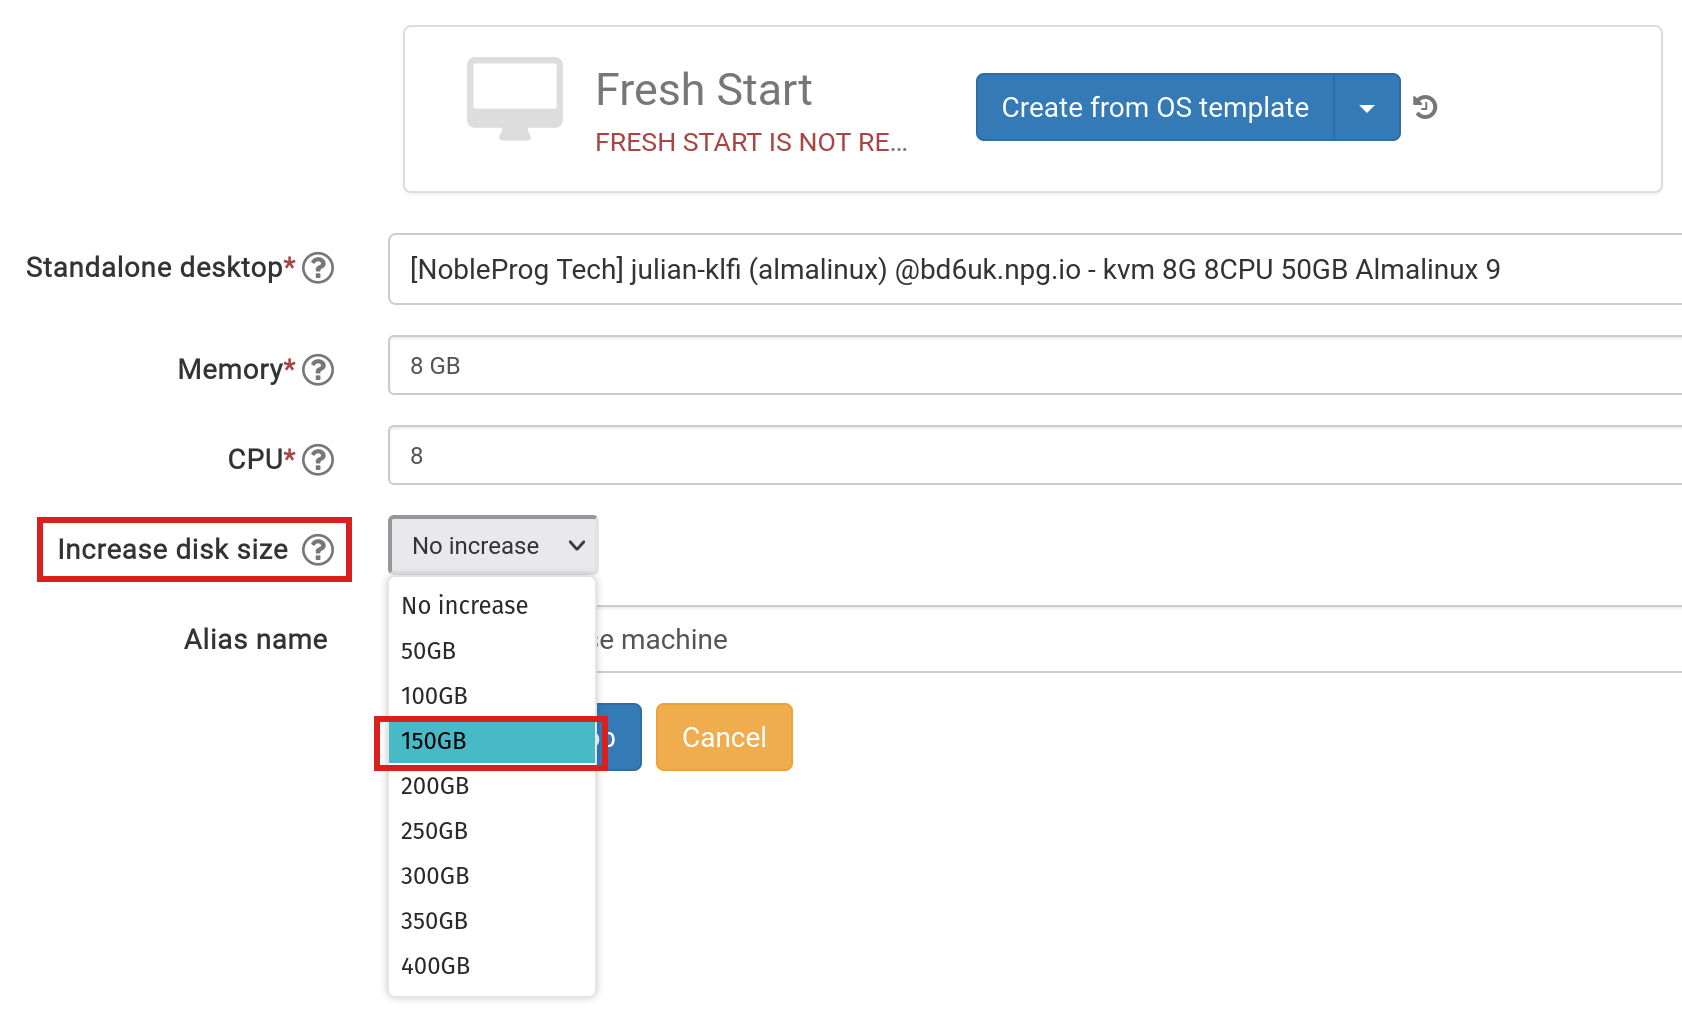 Create Freshh Start from Standalone, choose disk size change